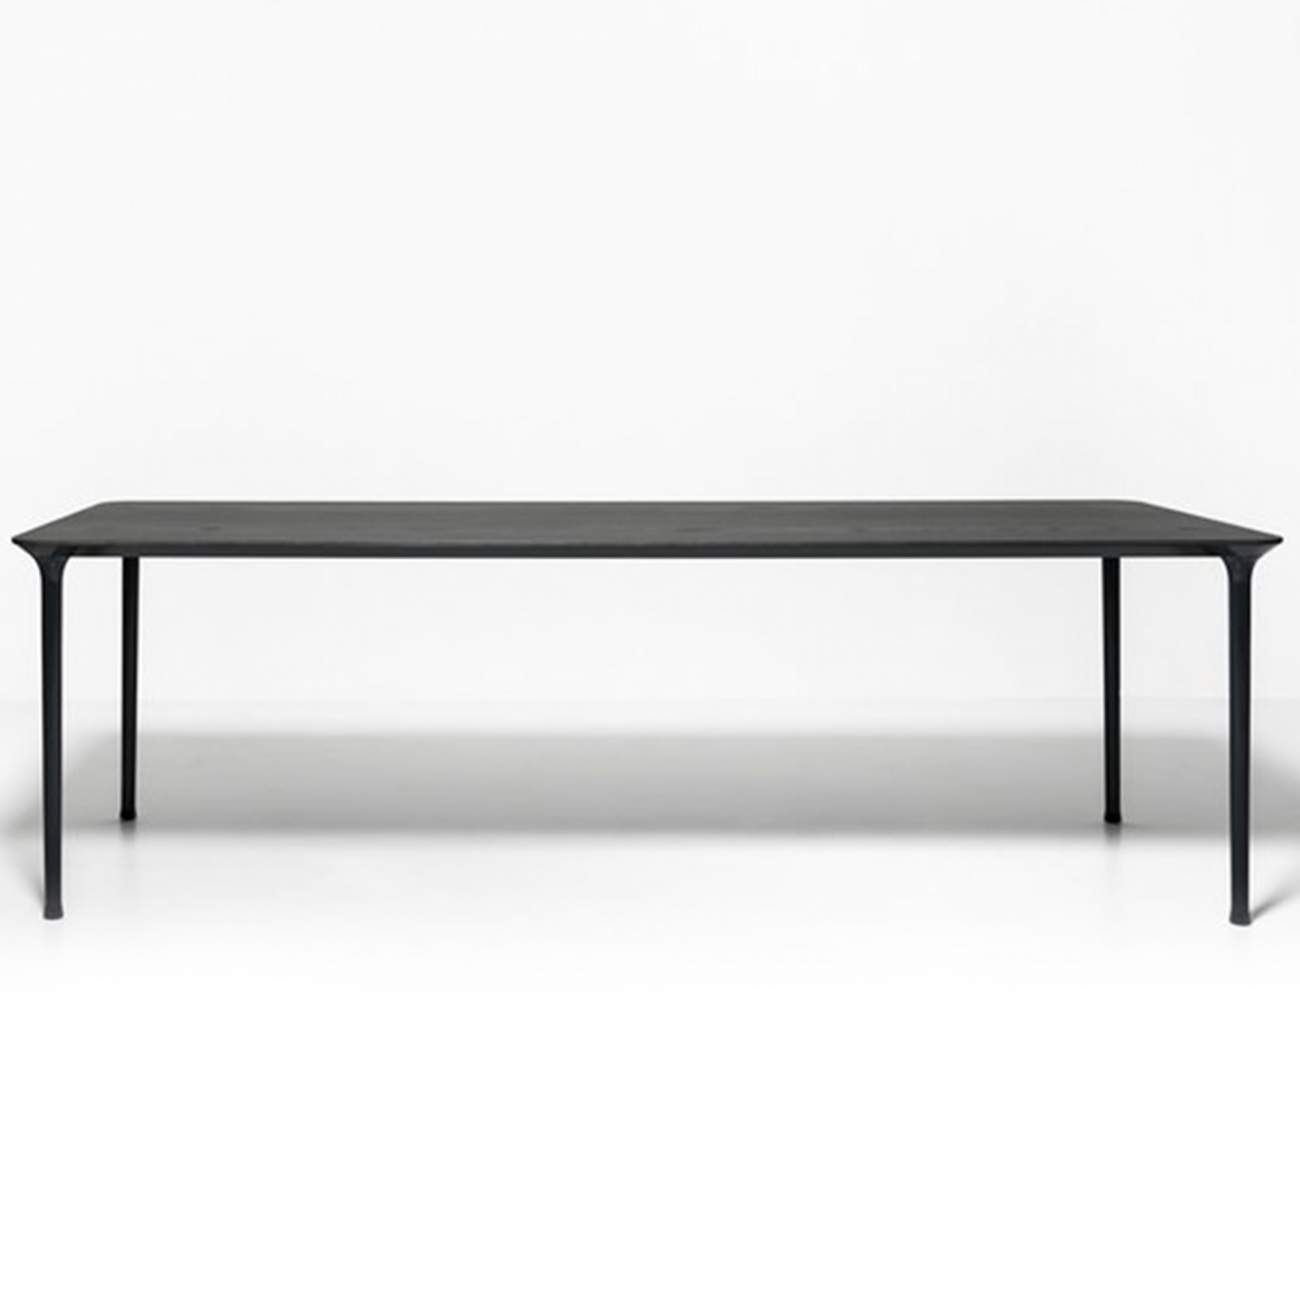 Tacchini Spindle Table